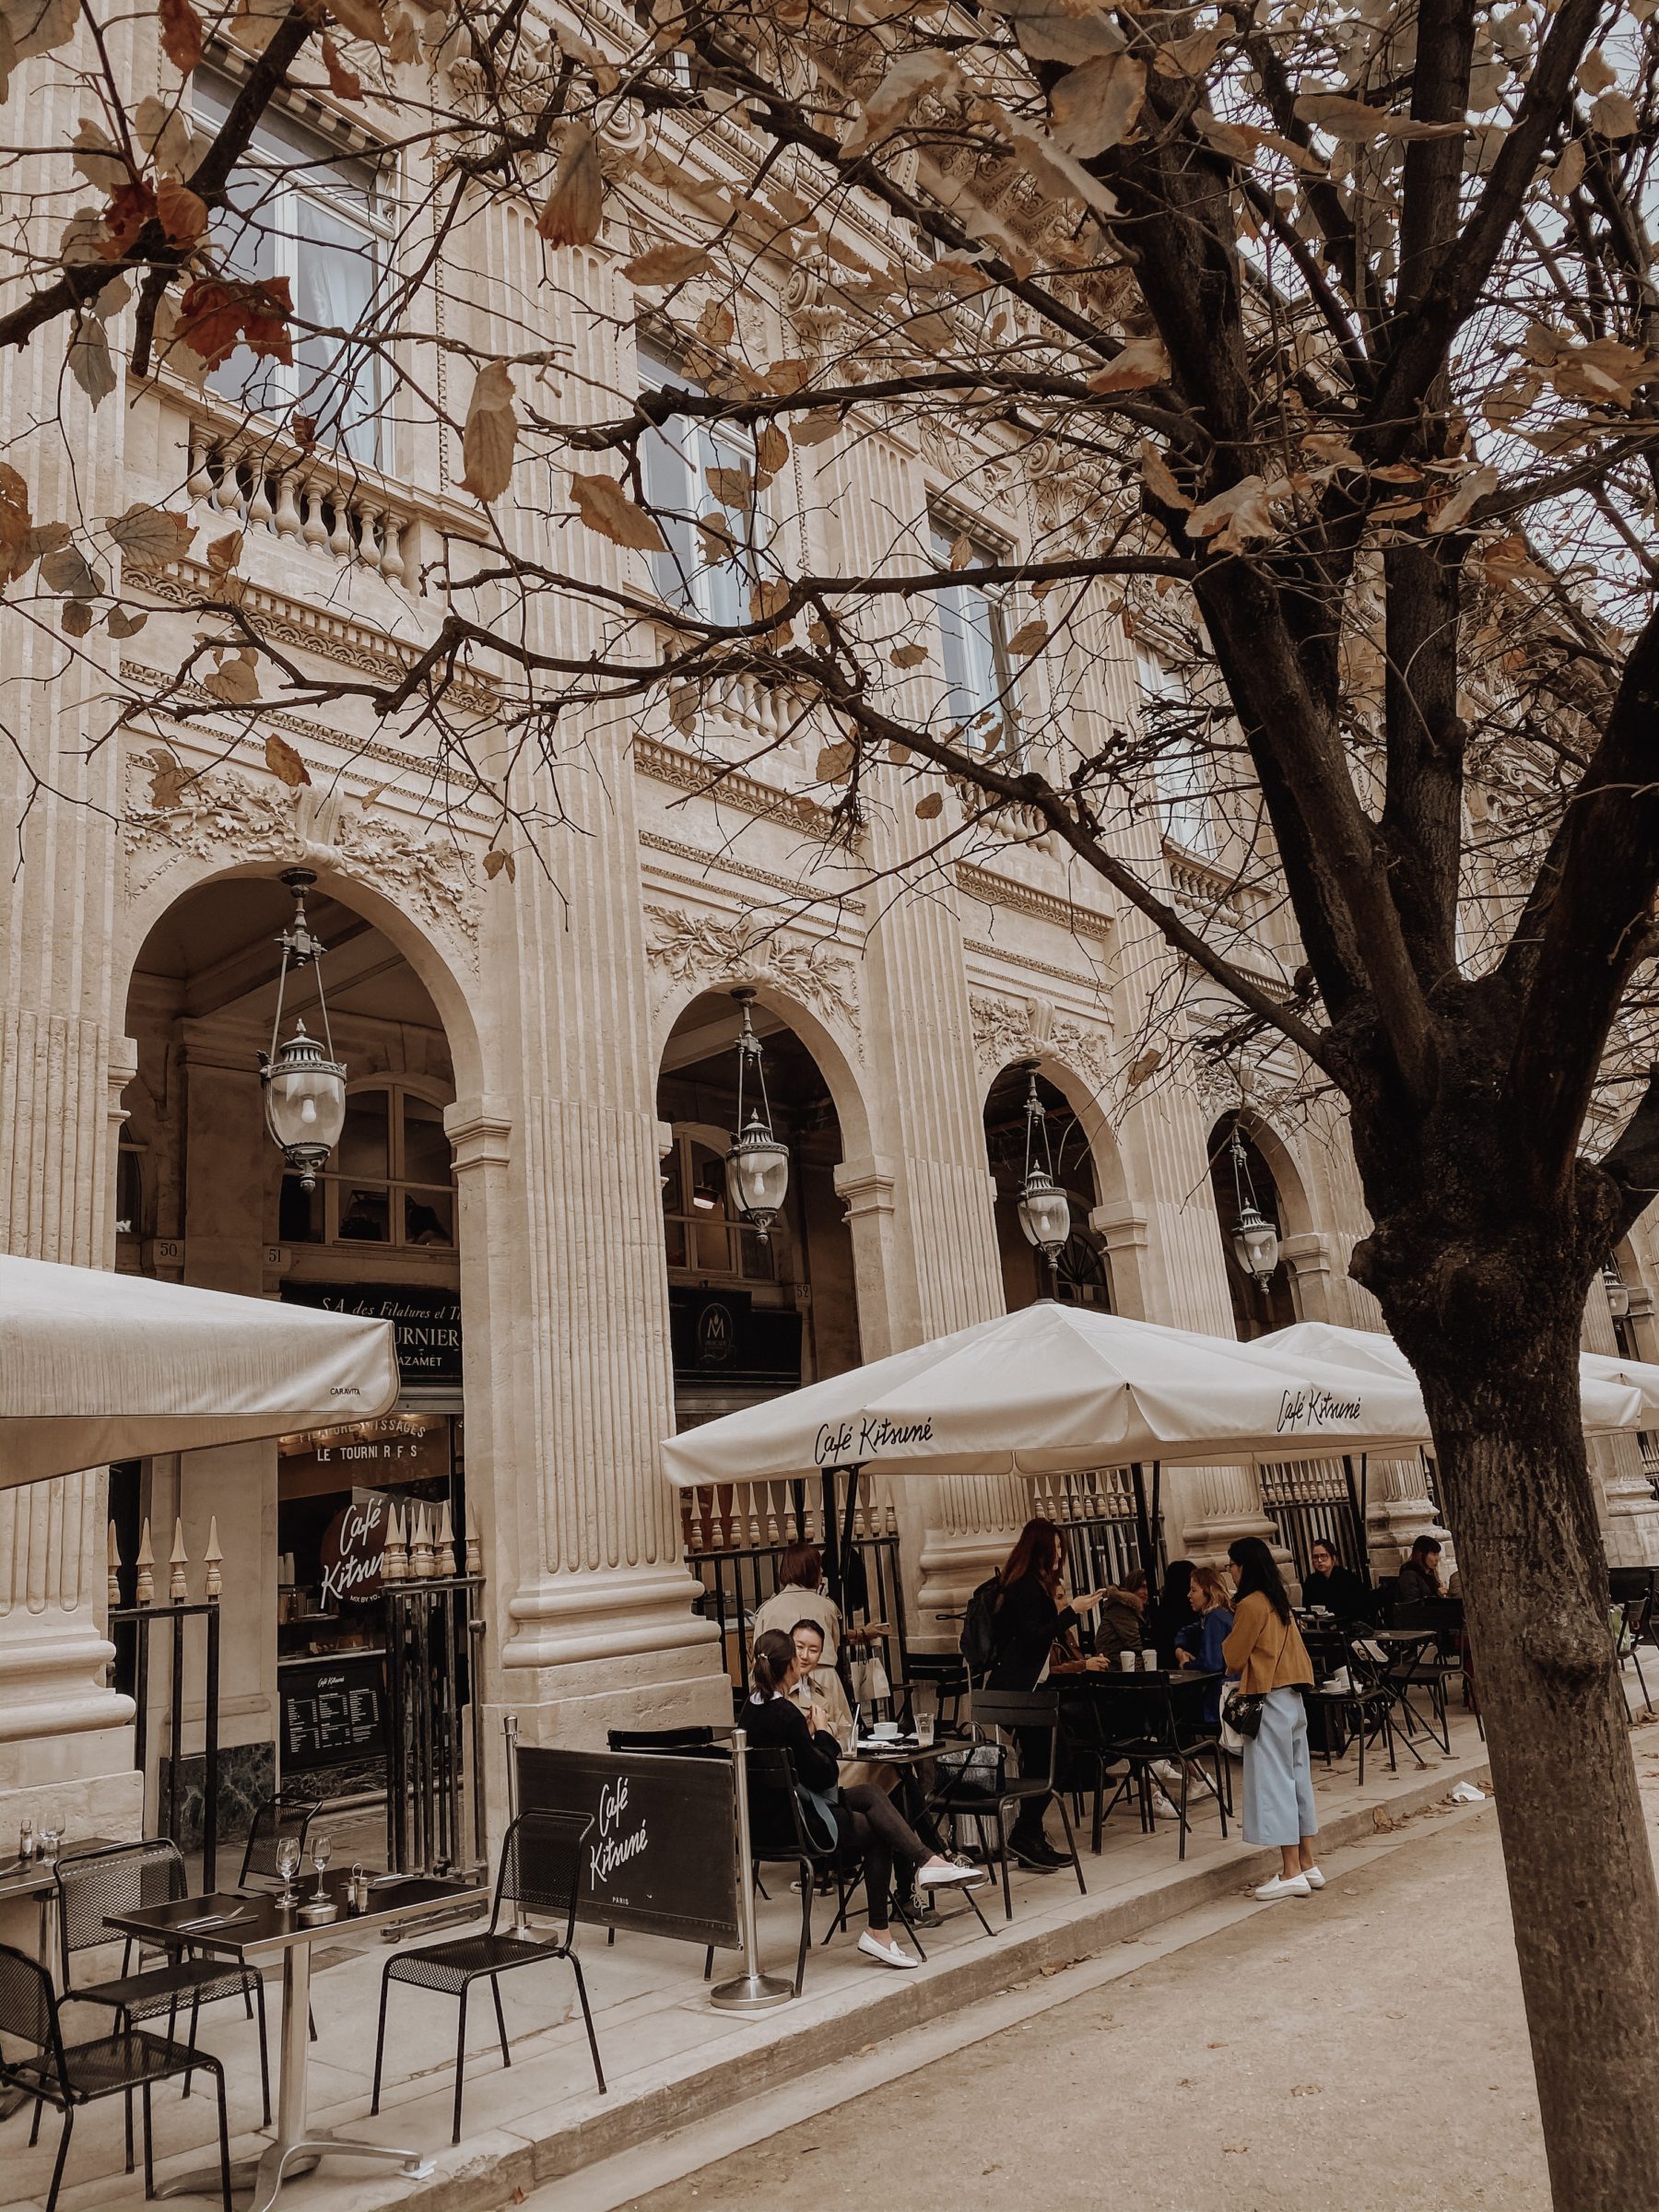 Cafes To Visit in Paris | Paris Cafes | Cafe Kitsune | Blondie in the City by Hayley Larue